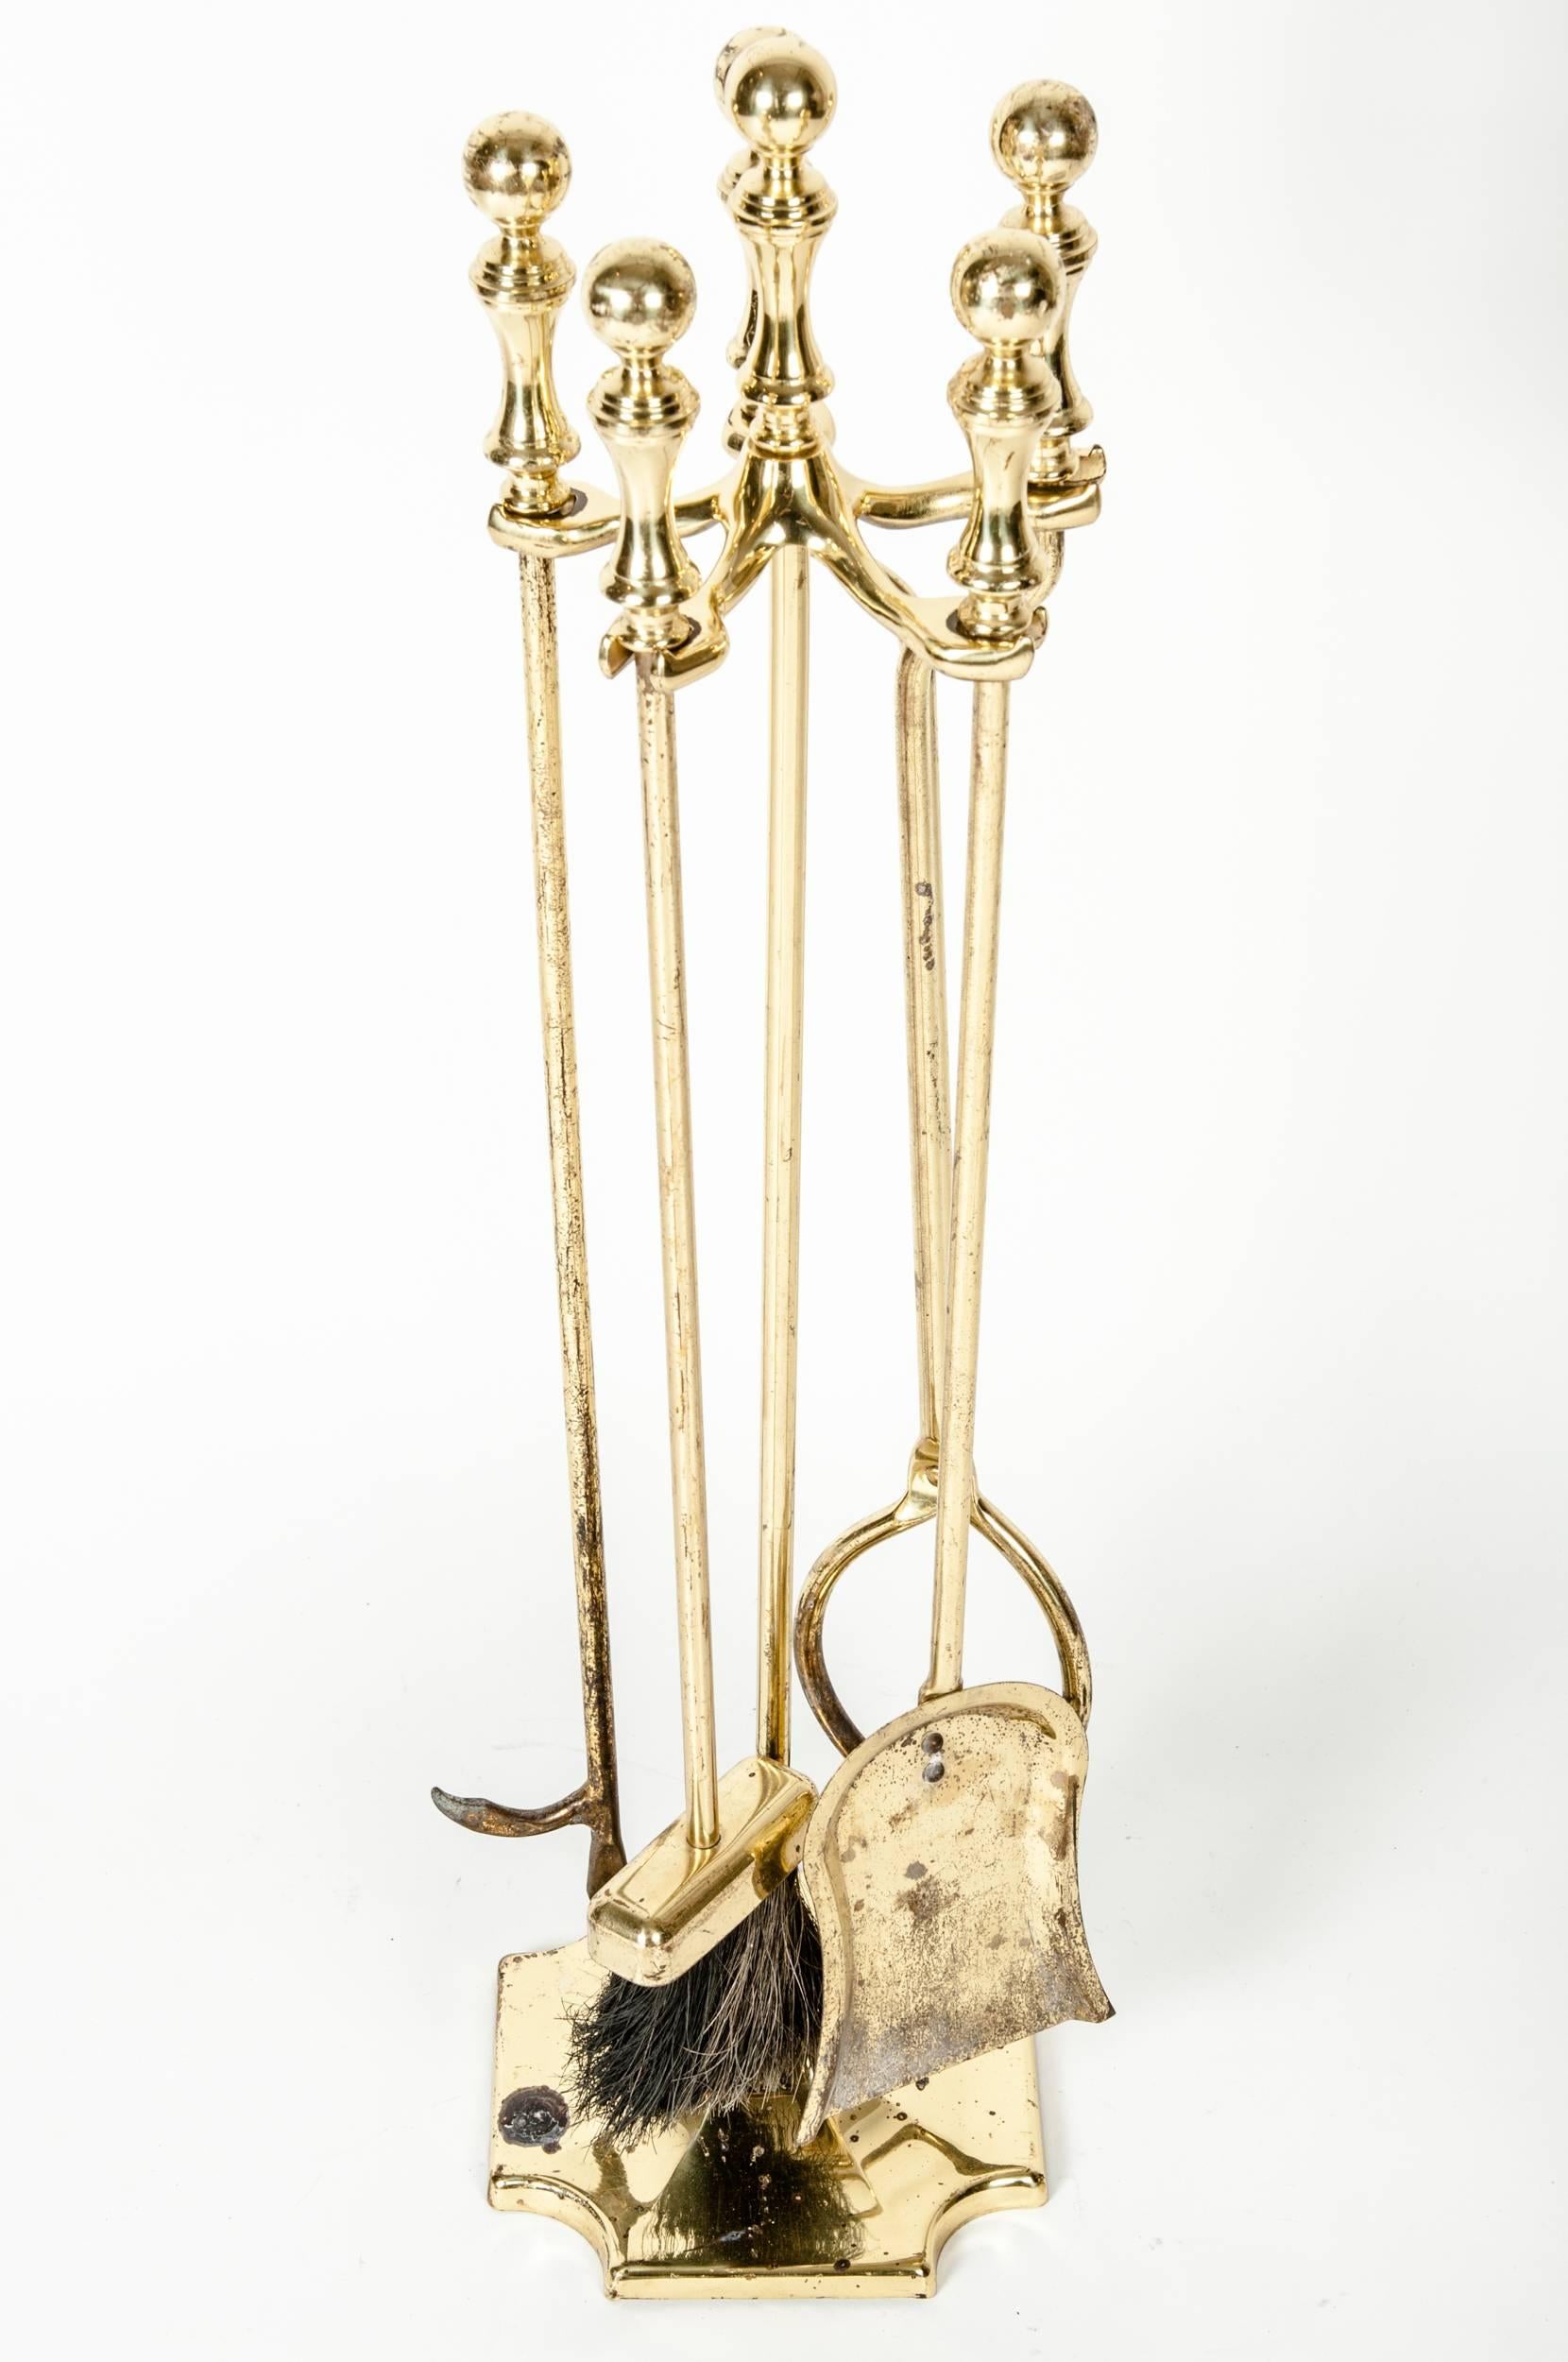 Vintage solid brass fire tool set. The fire tool measure 34 inches high x 8.5 inches diameter.